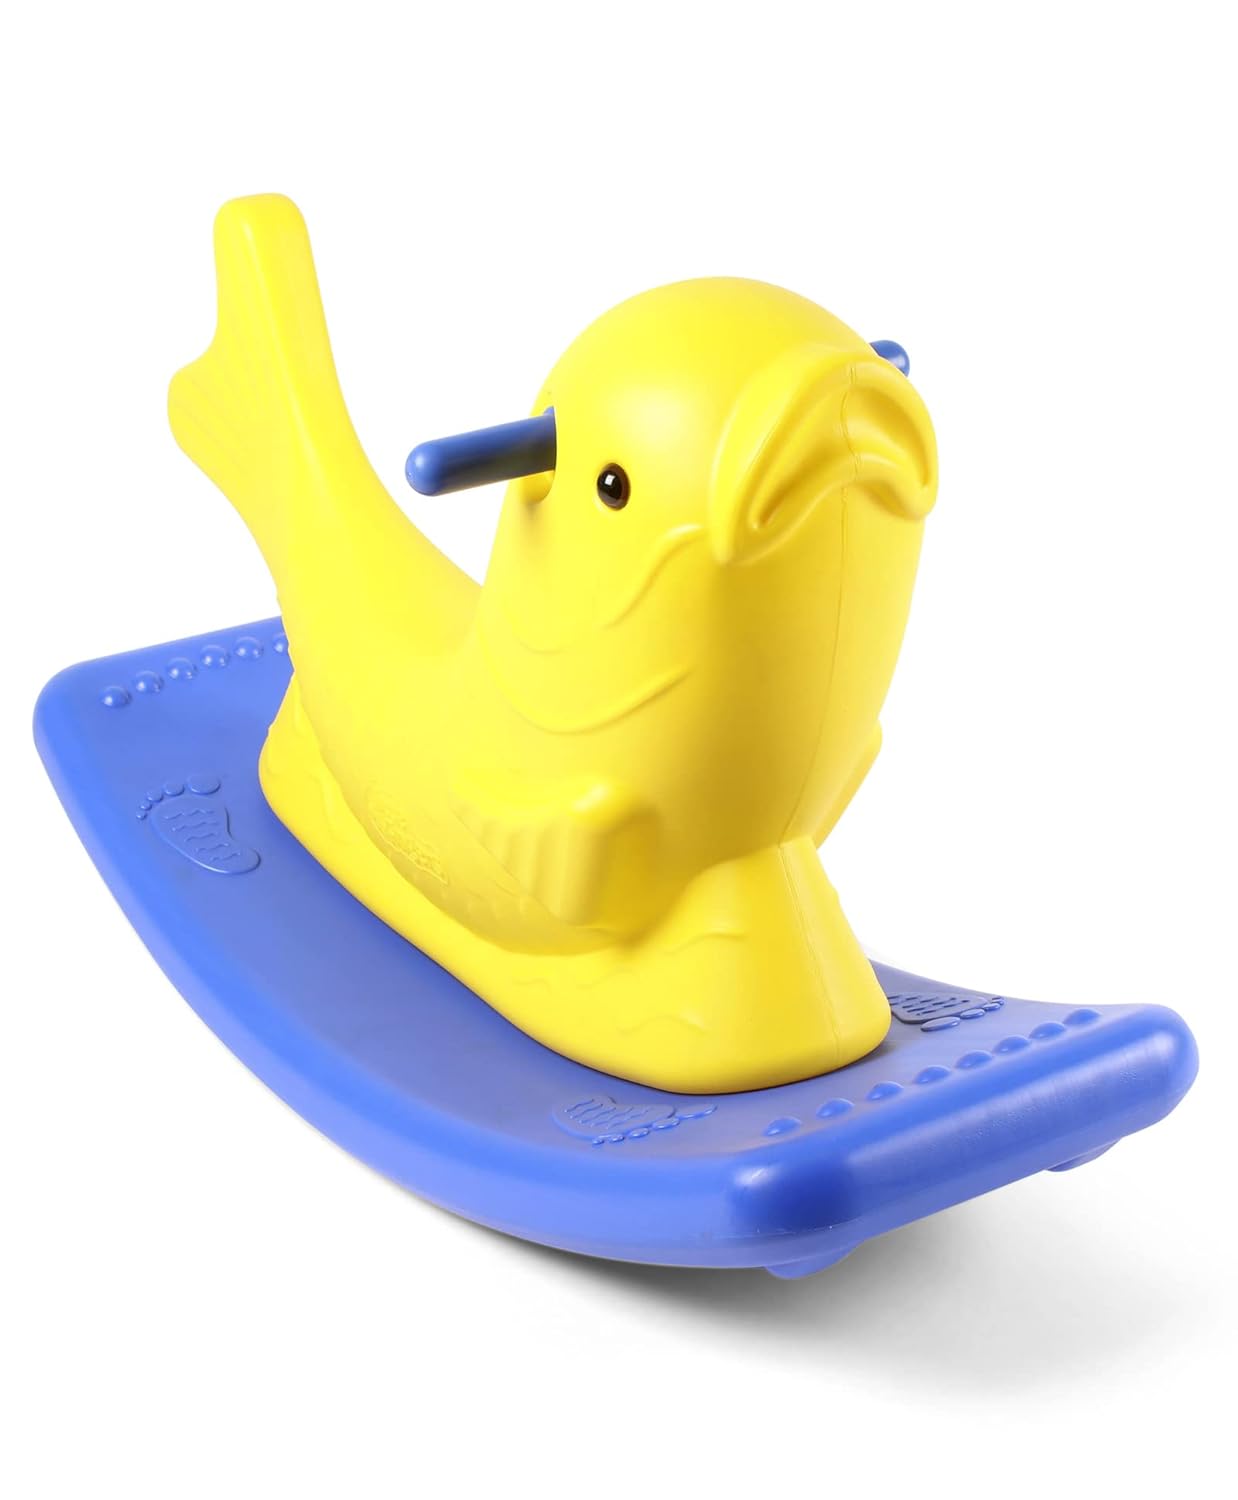 PATOYS | Ride-On Fish Rocker for Kids Baby Rocking Ride on toys Multicolor - PATOYS